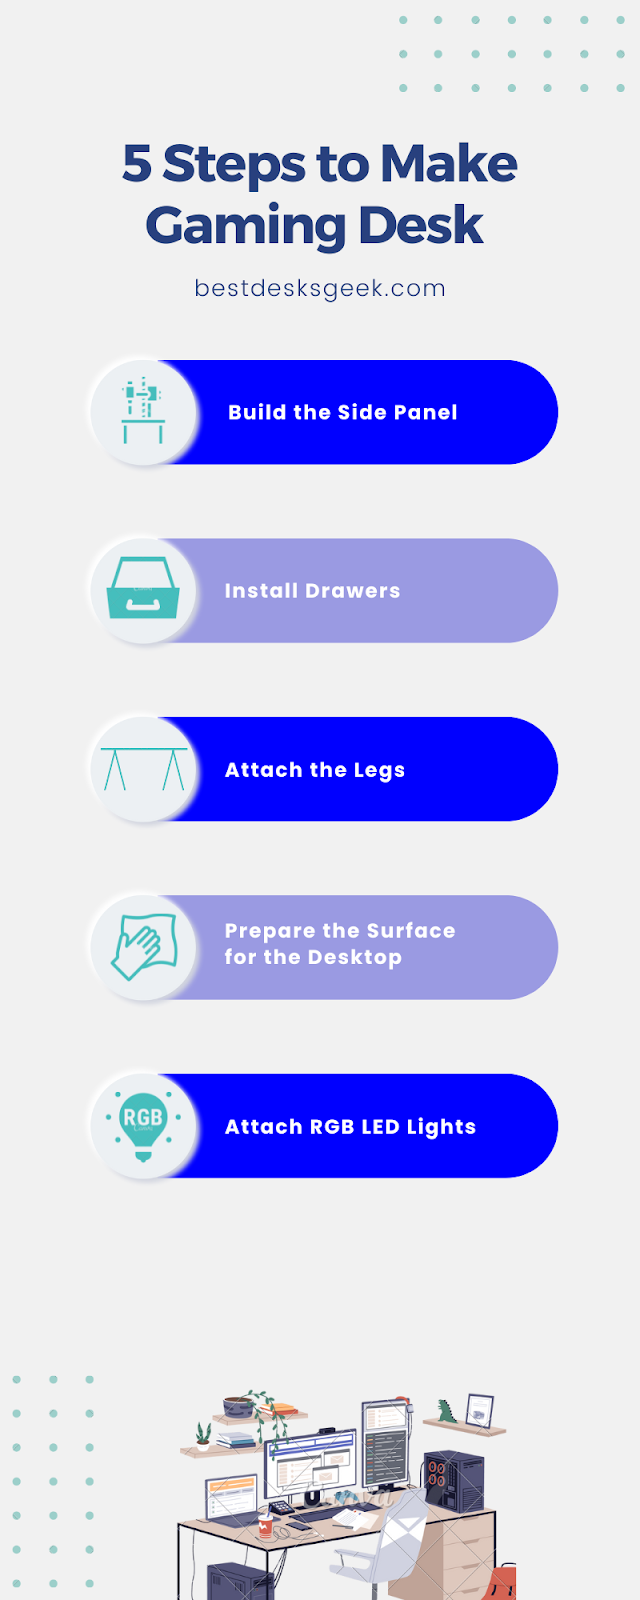 An infographic showing Make a Gaming Desk